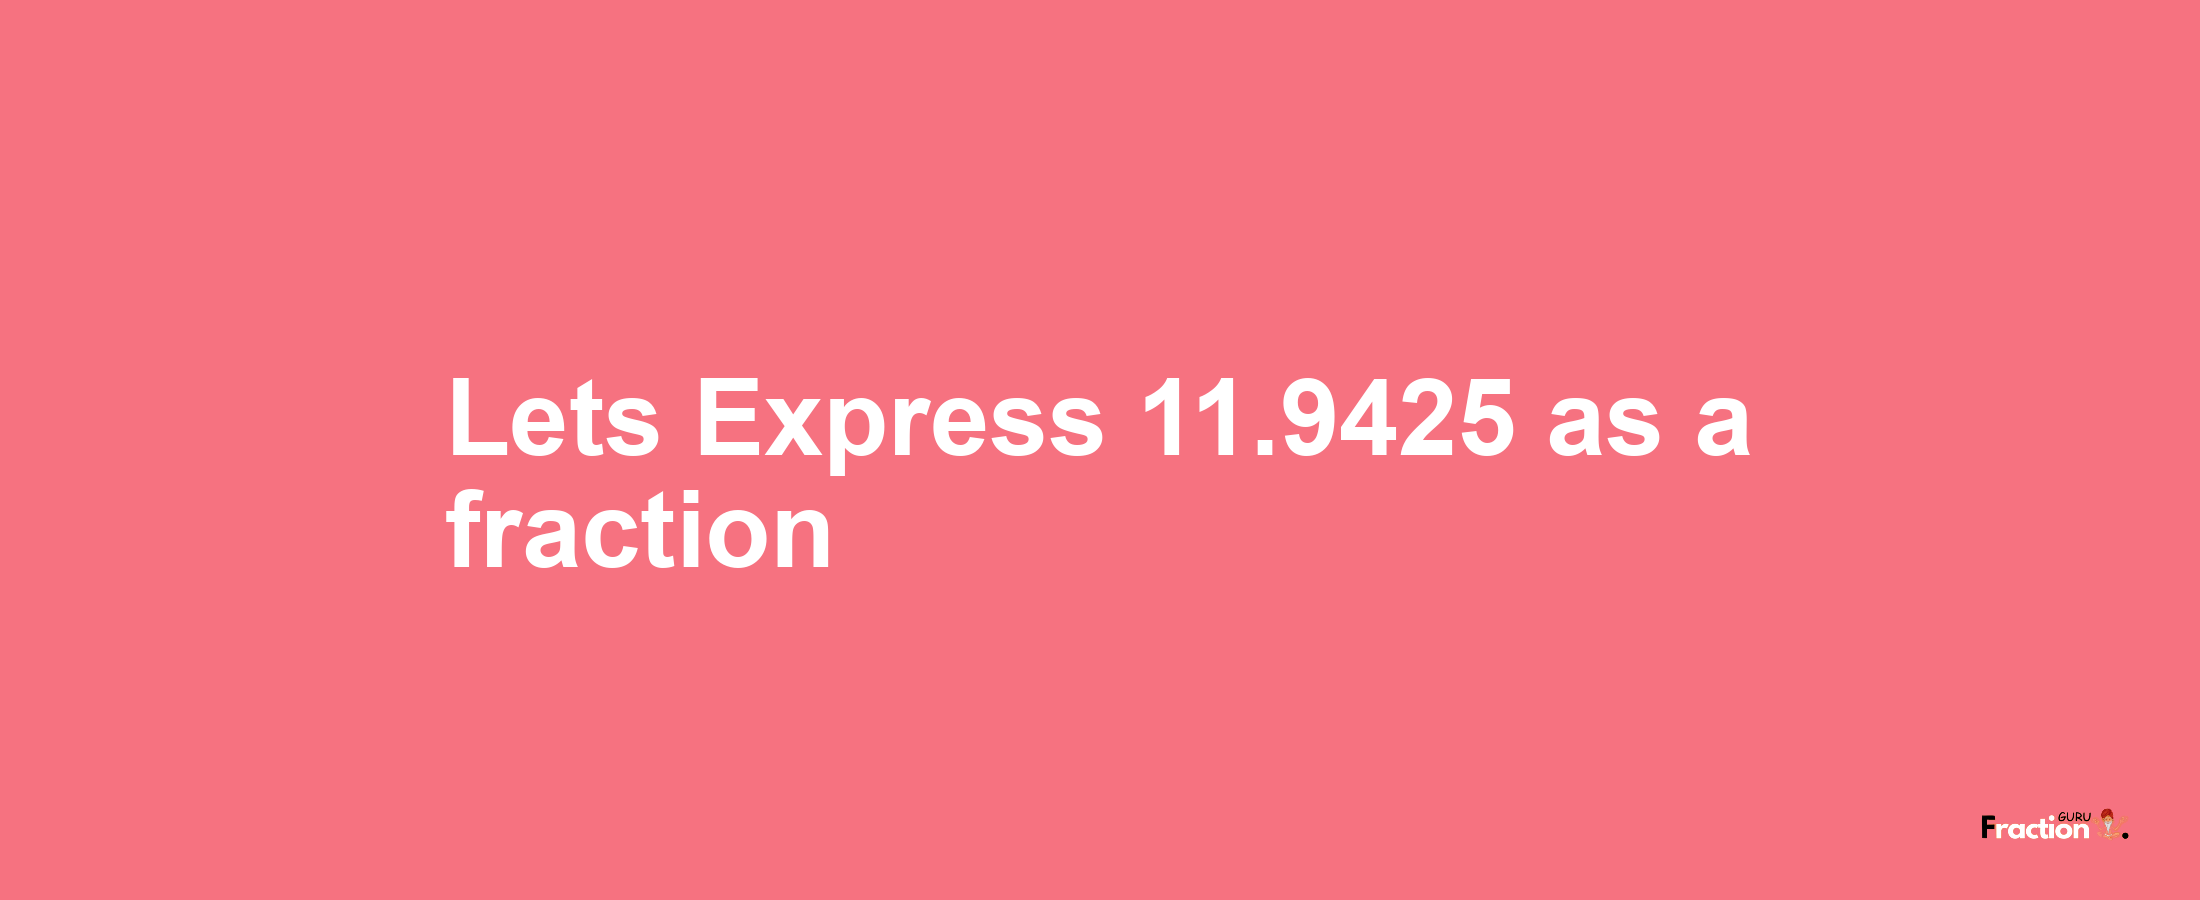 Lets Express 11.9425 as afraction